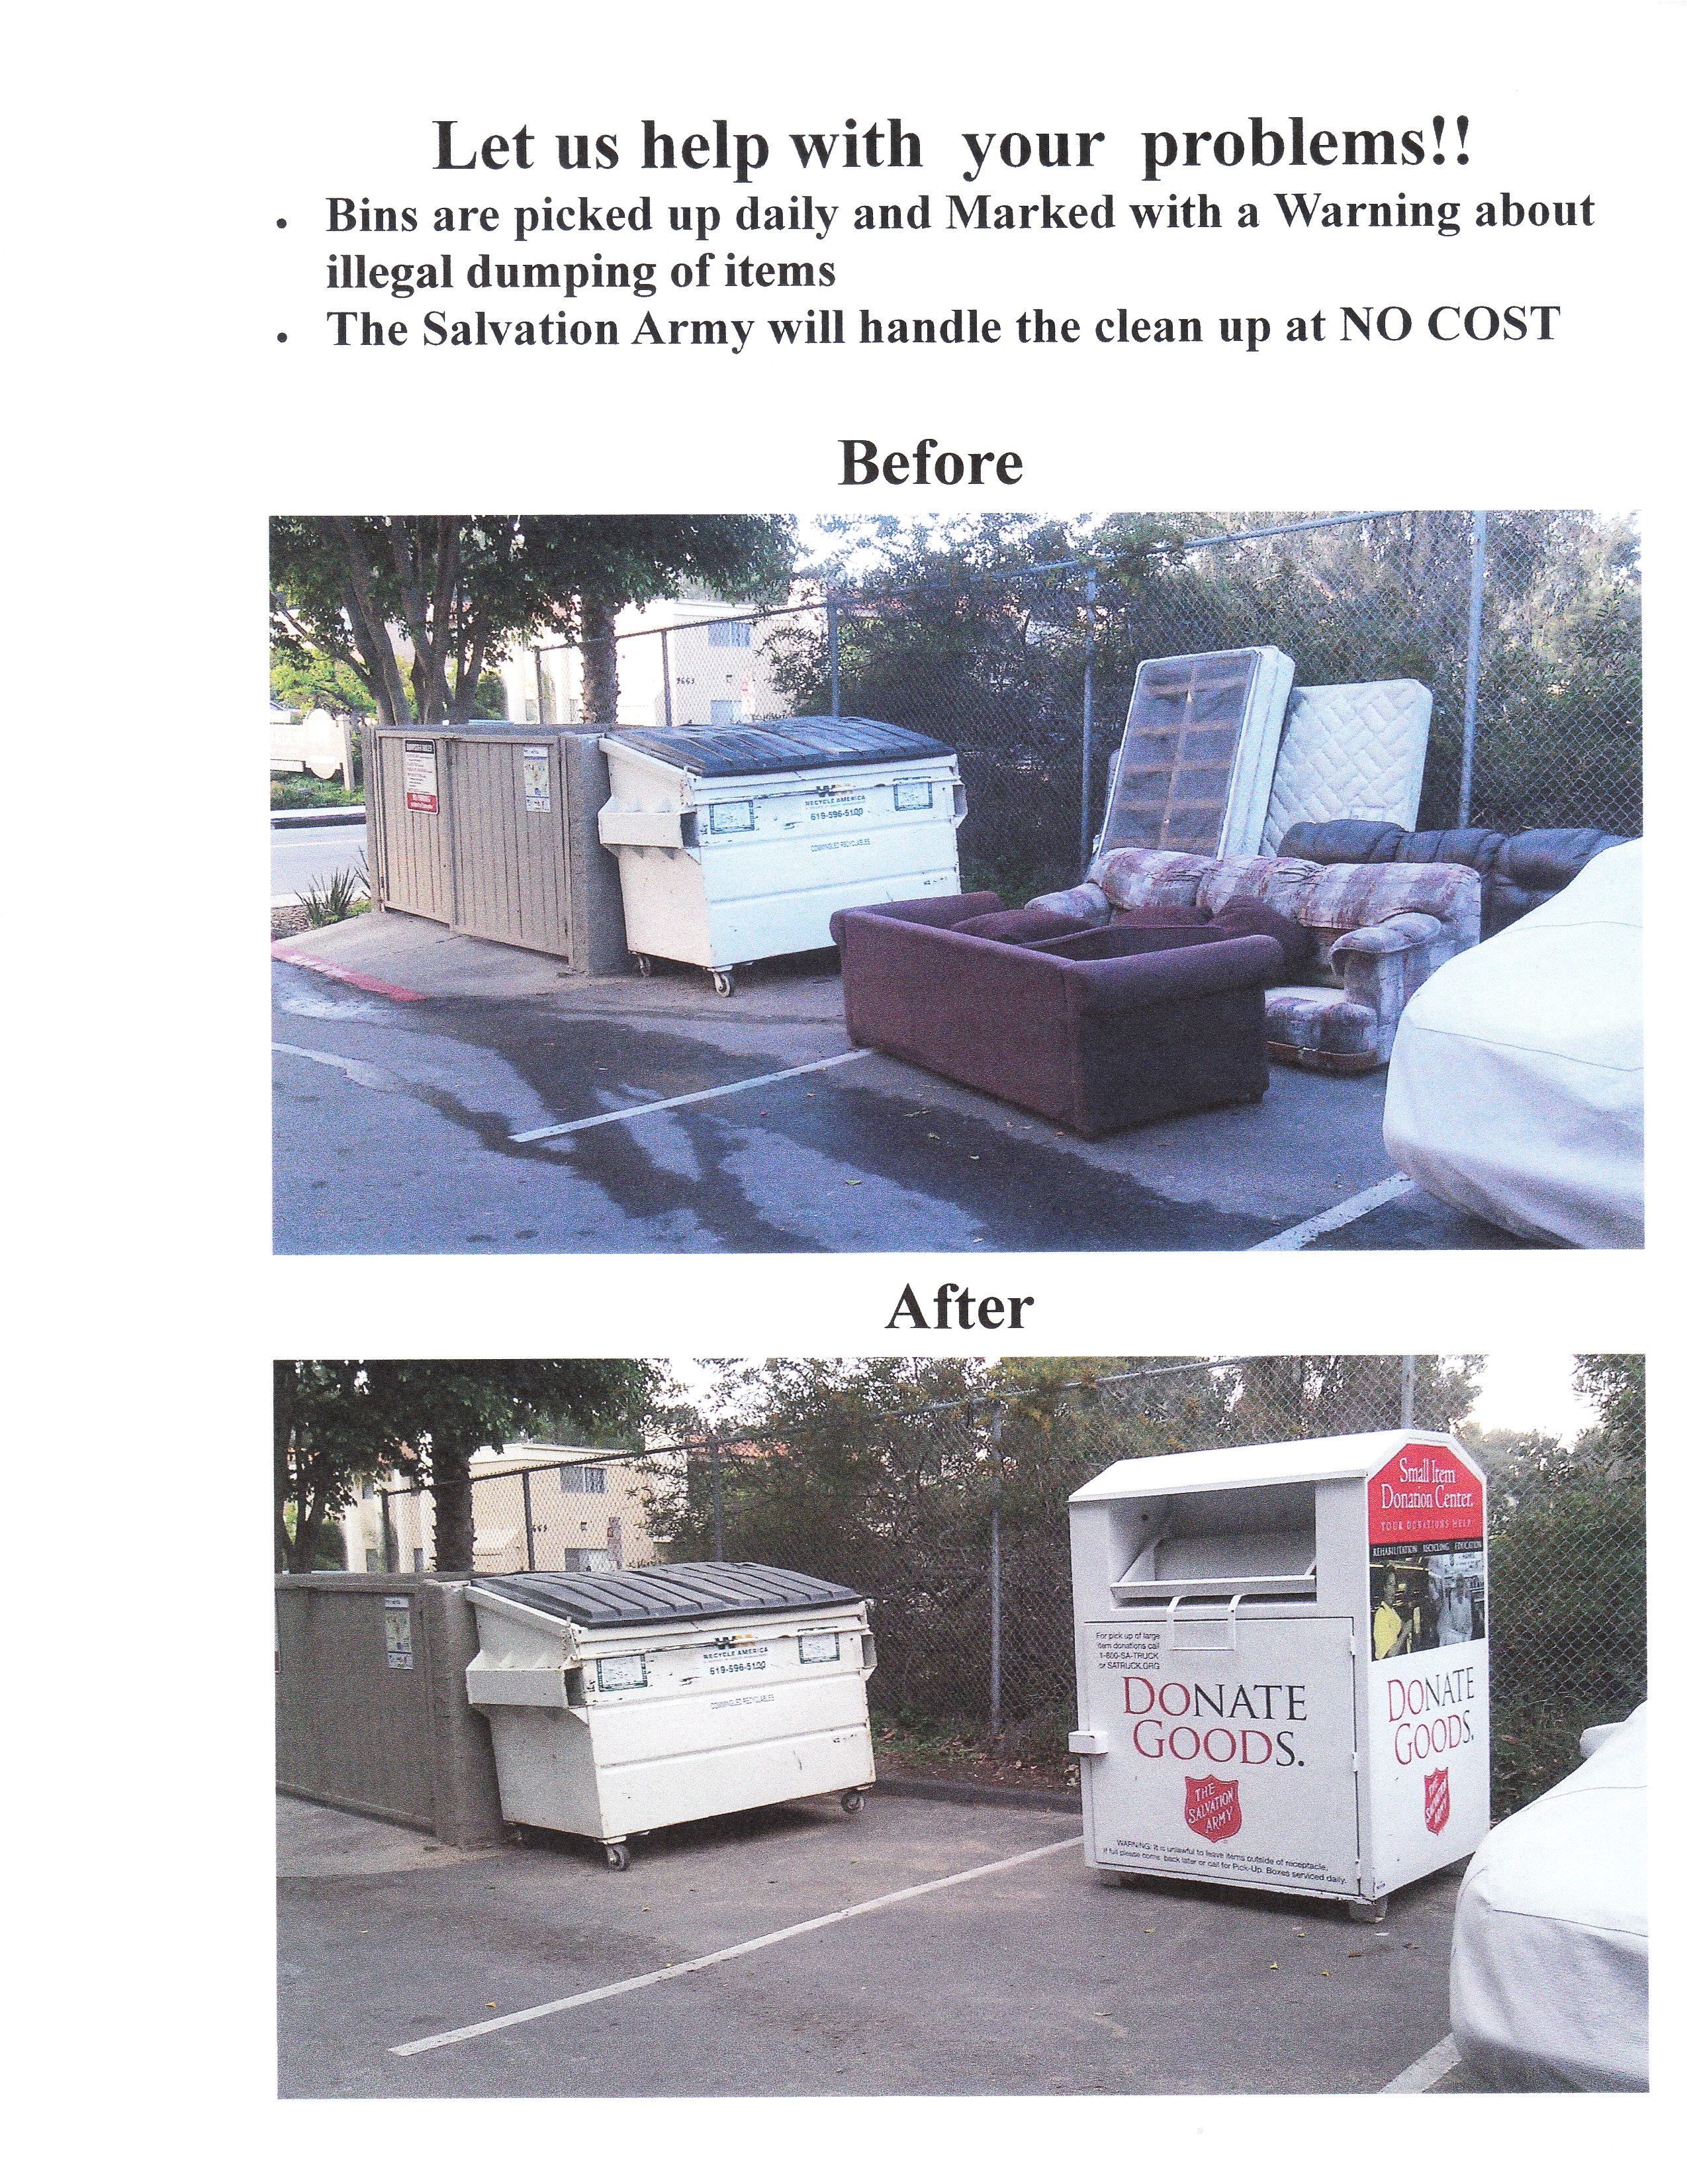 donation bin before and after from the salvation army picking up items and providing free programs